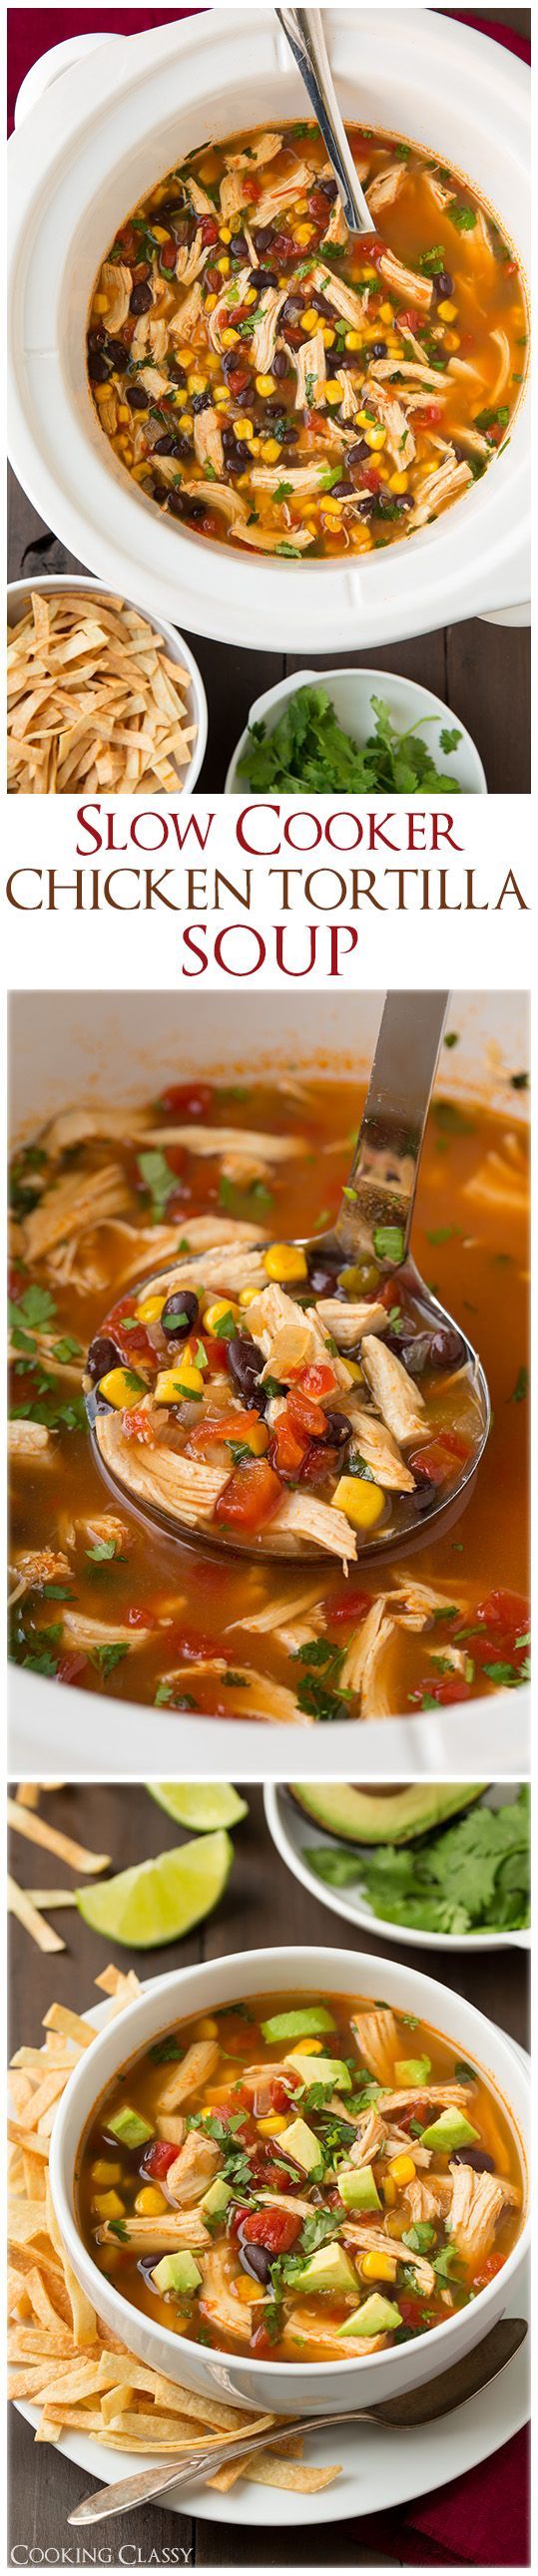 Slow Cooker Chicken Tortilla Soup – this is definitely going to be added to our dinner rotation, LOVED it and its so easy!